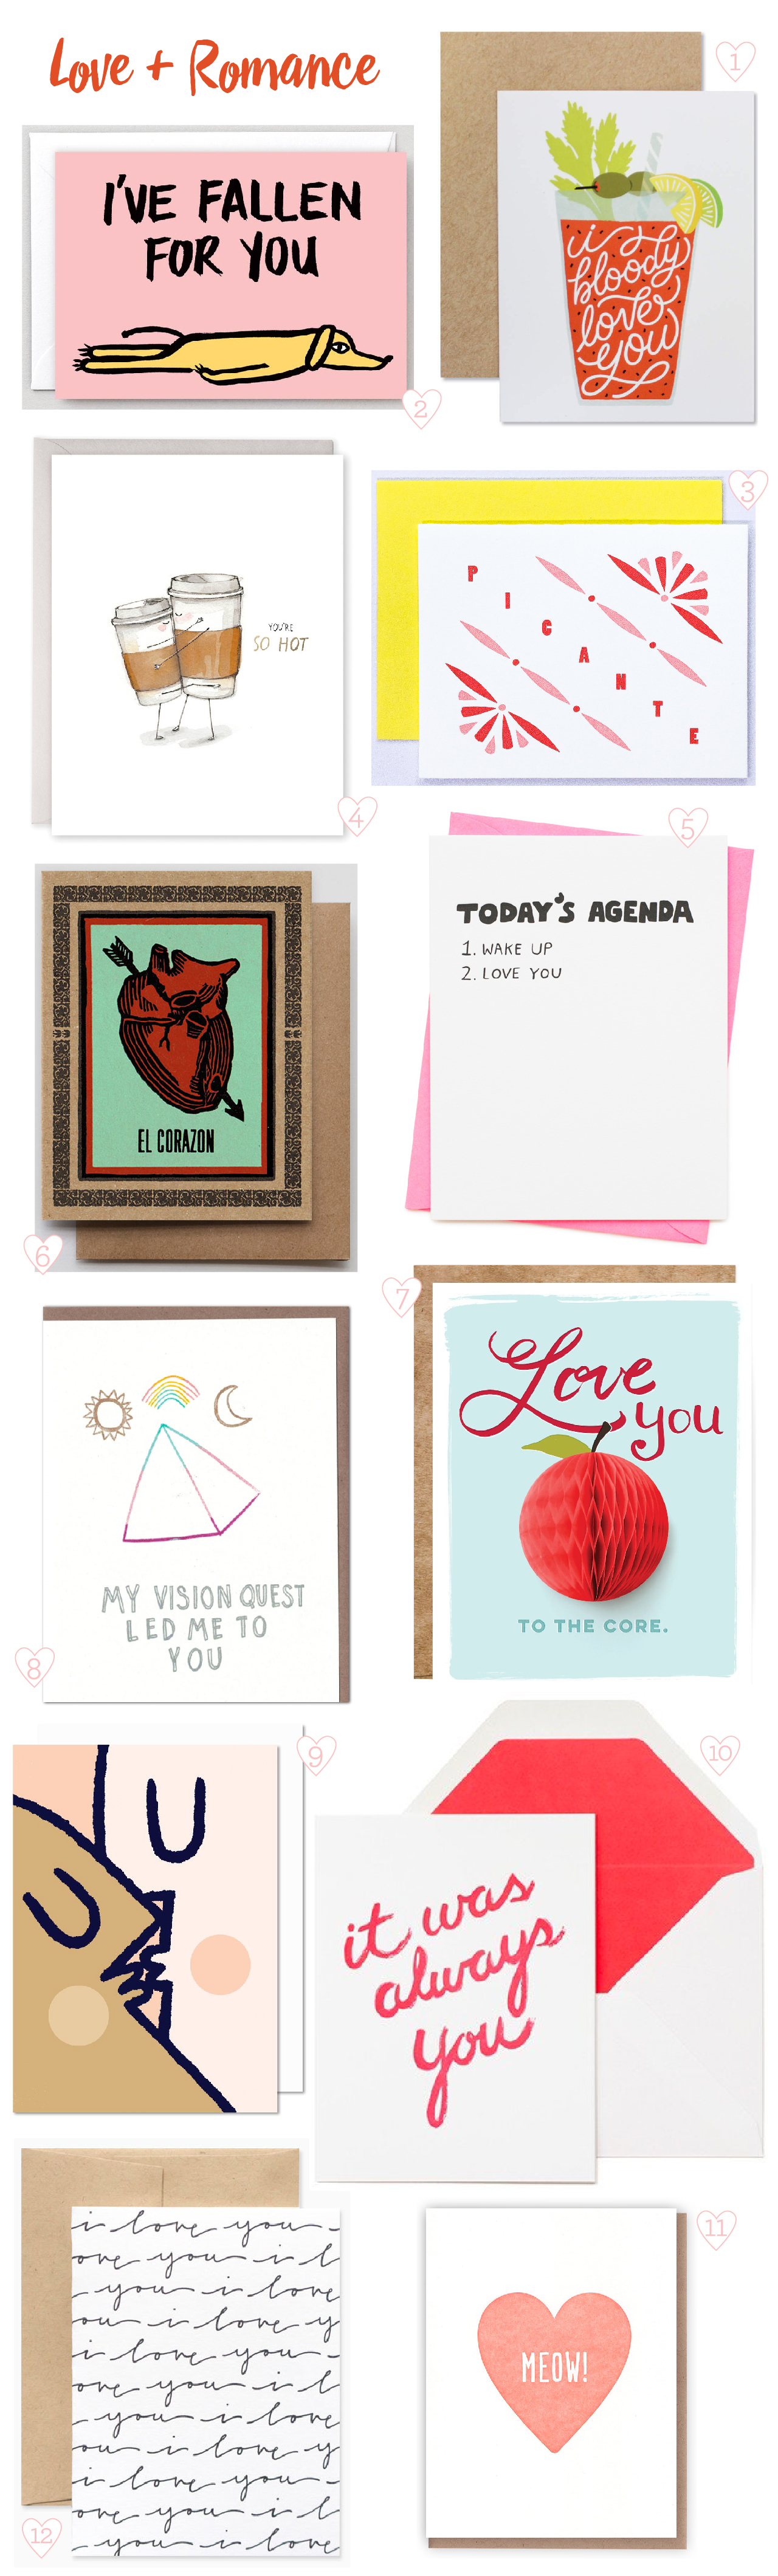 Love and Romance Card Round Up